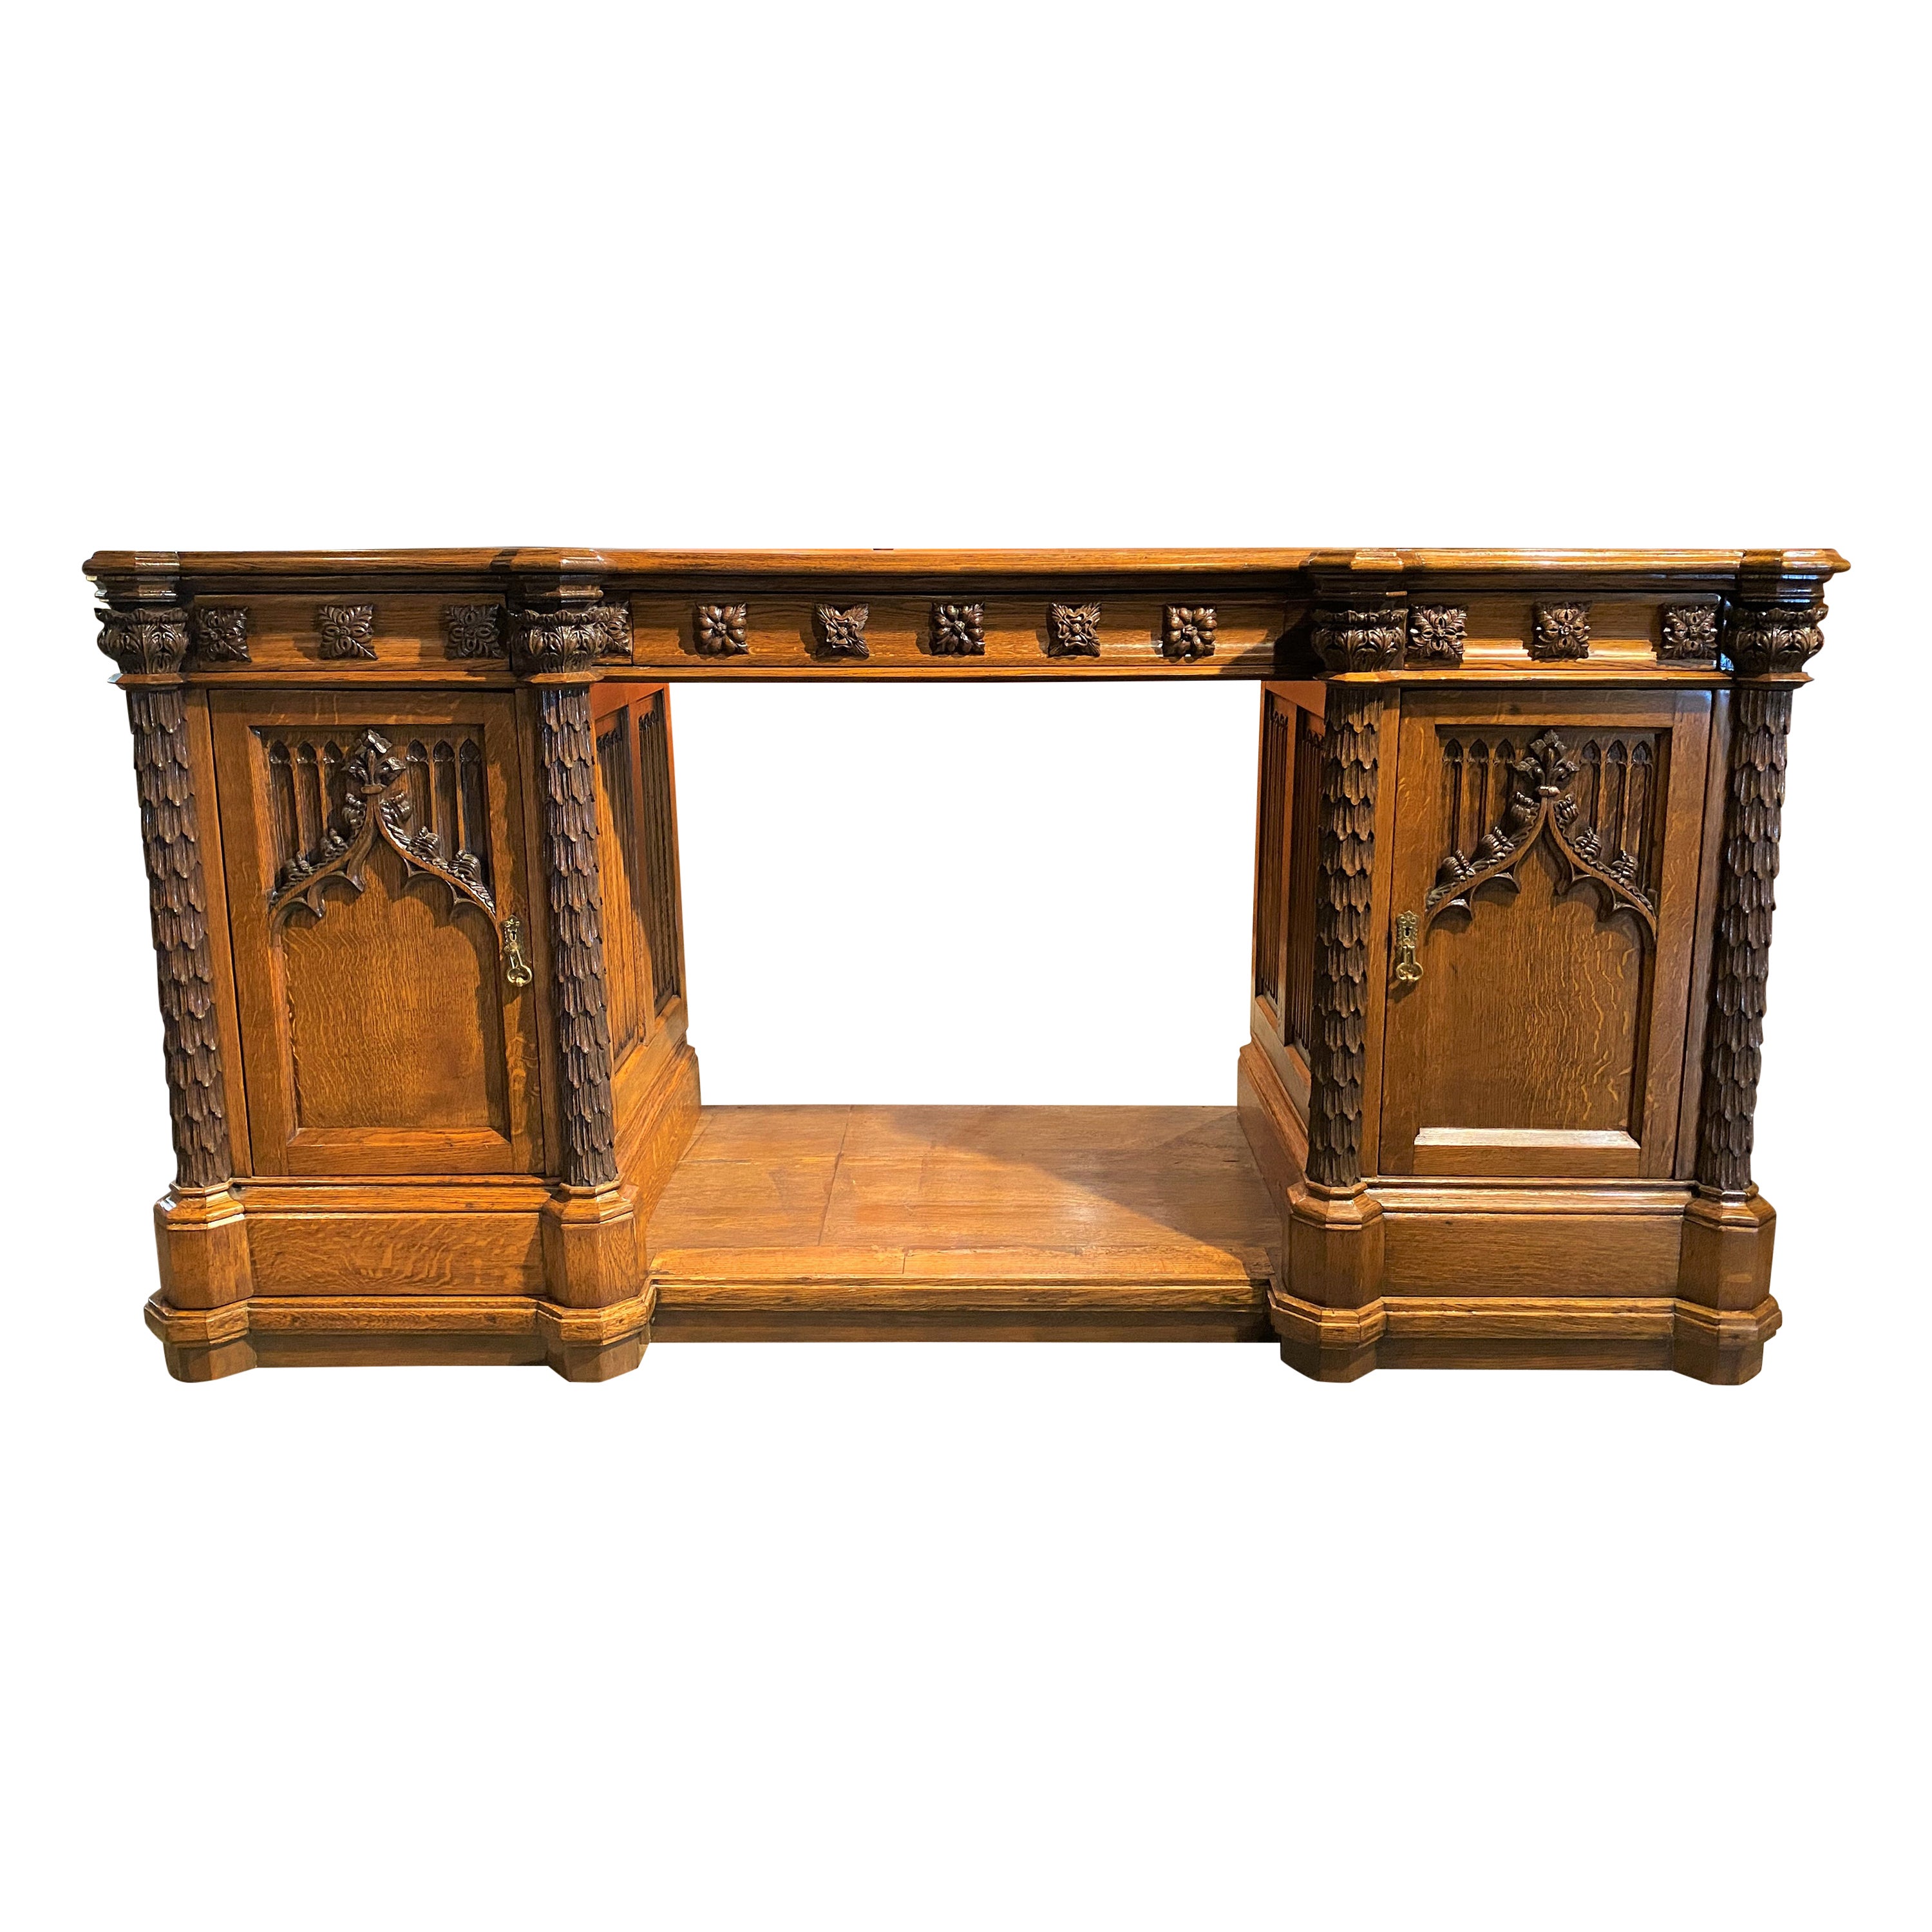 Gothic Revival Quarter Sawn Oak Sideboard with Exceptional Carving For Sale